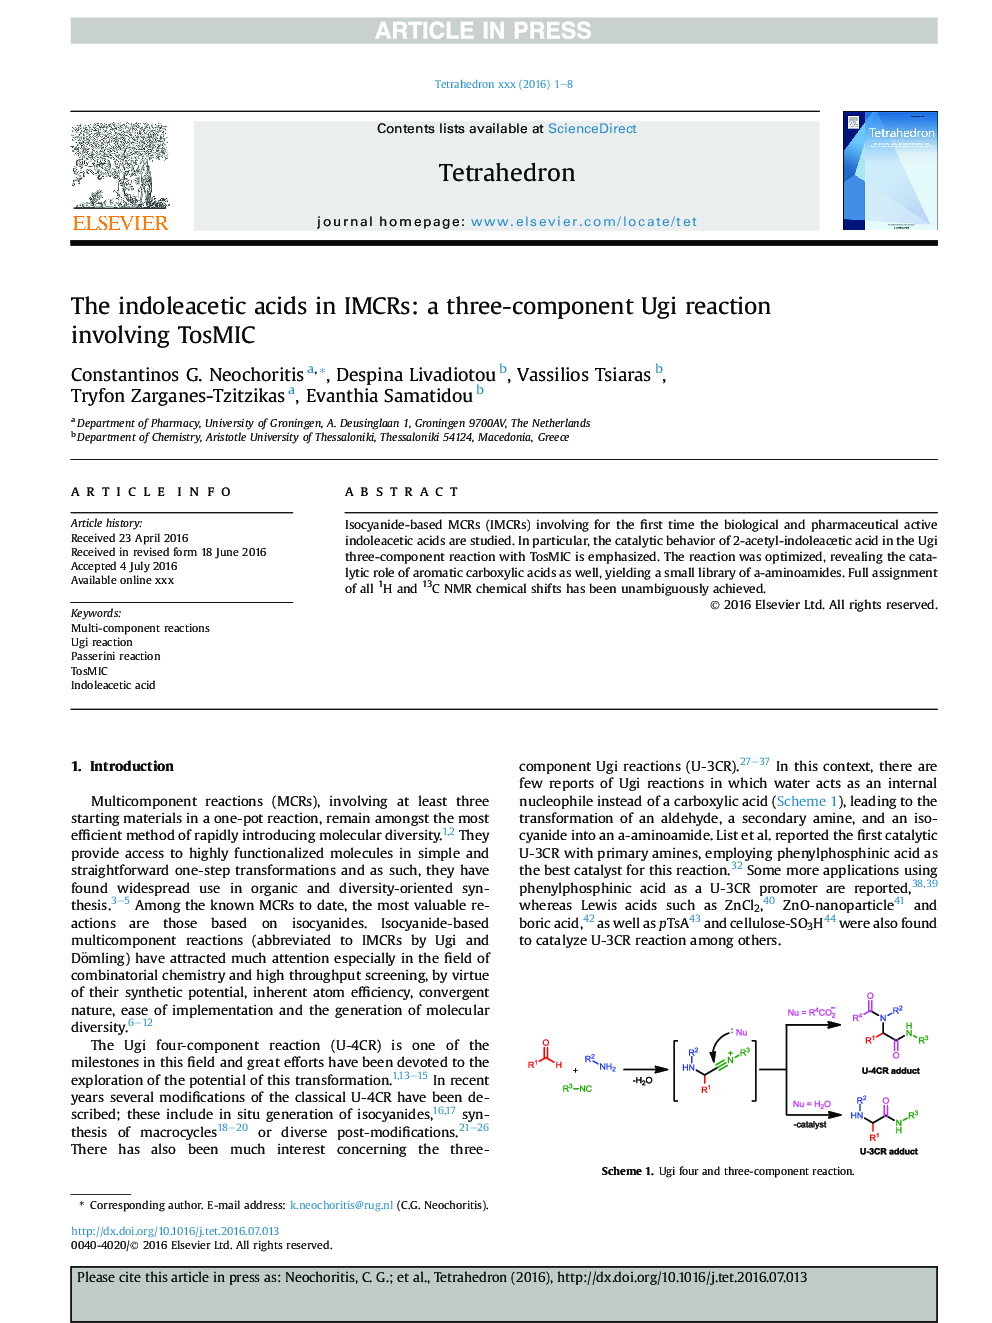 The indoleacetic acids in IMCRs: a three-component Ugi reaction involving TosMIC